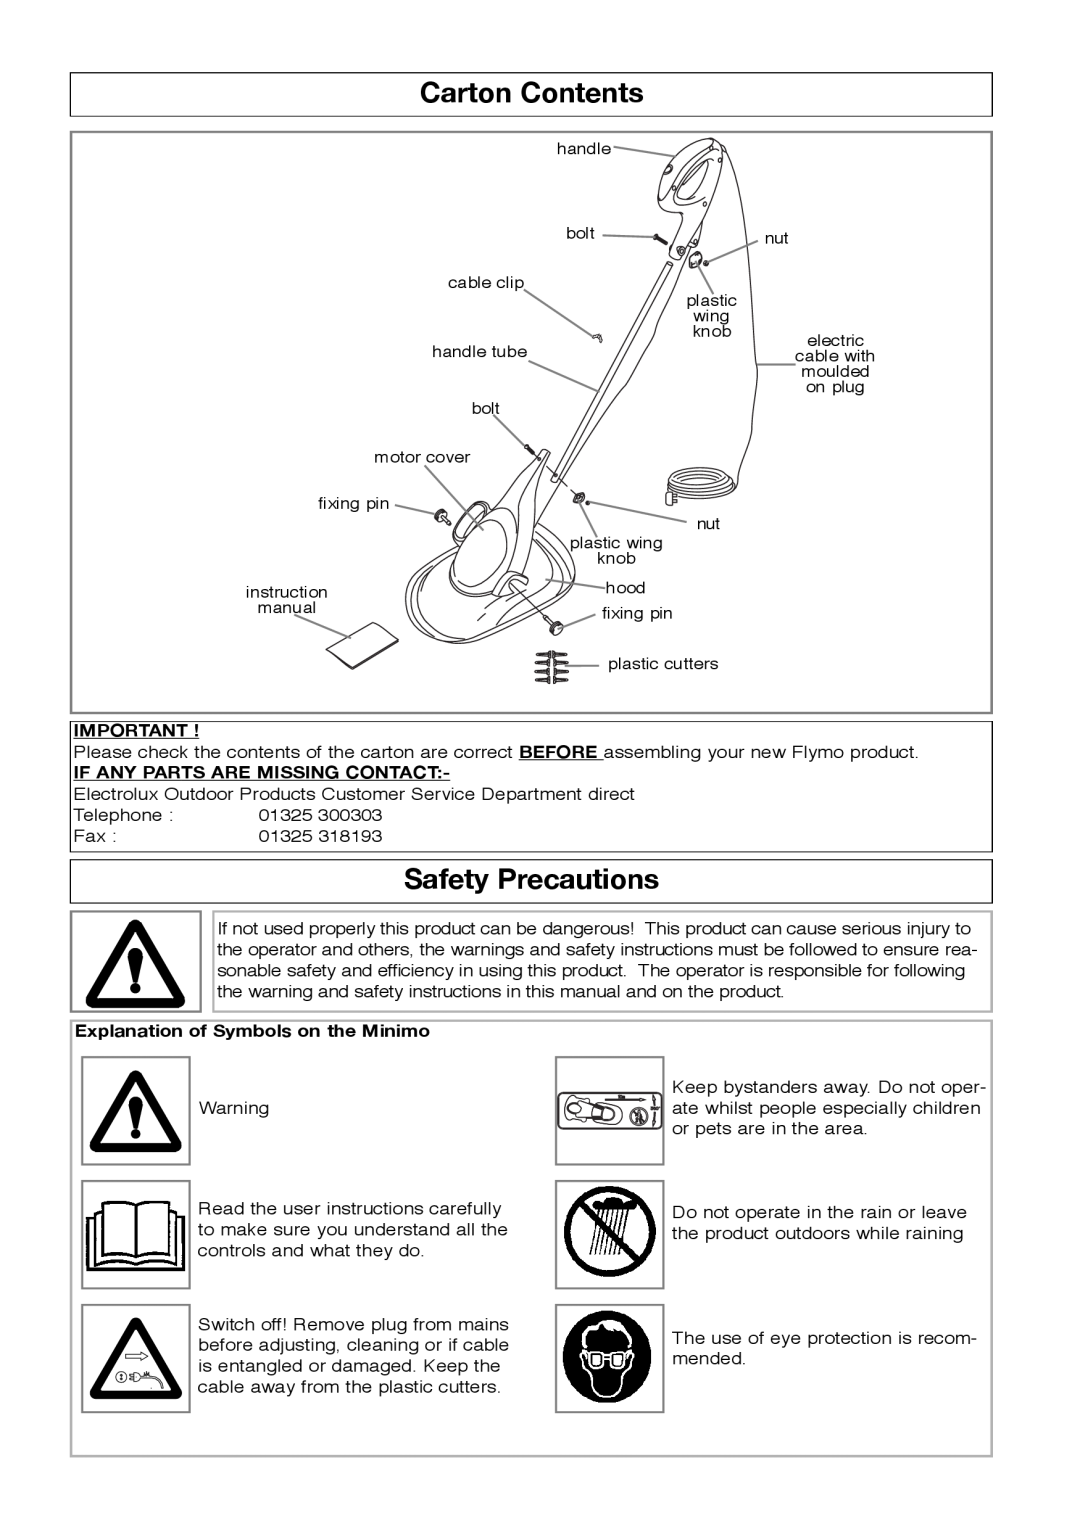 Flymo manual Carton Contents, Safety Precautions, If Any Parts Are Missing Contact, Explanation of Symbols on the Minimo 